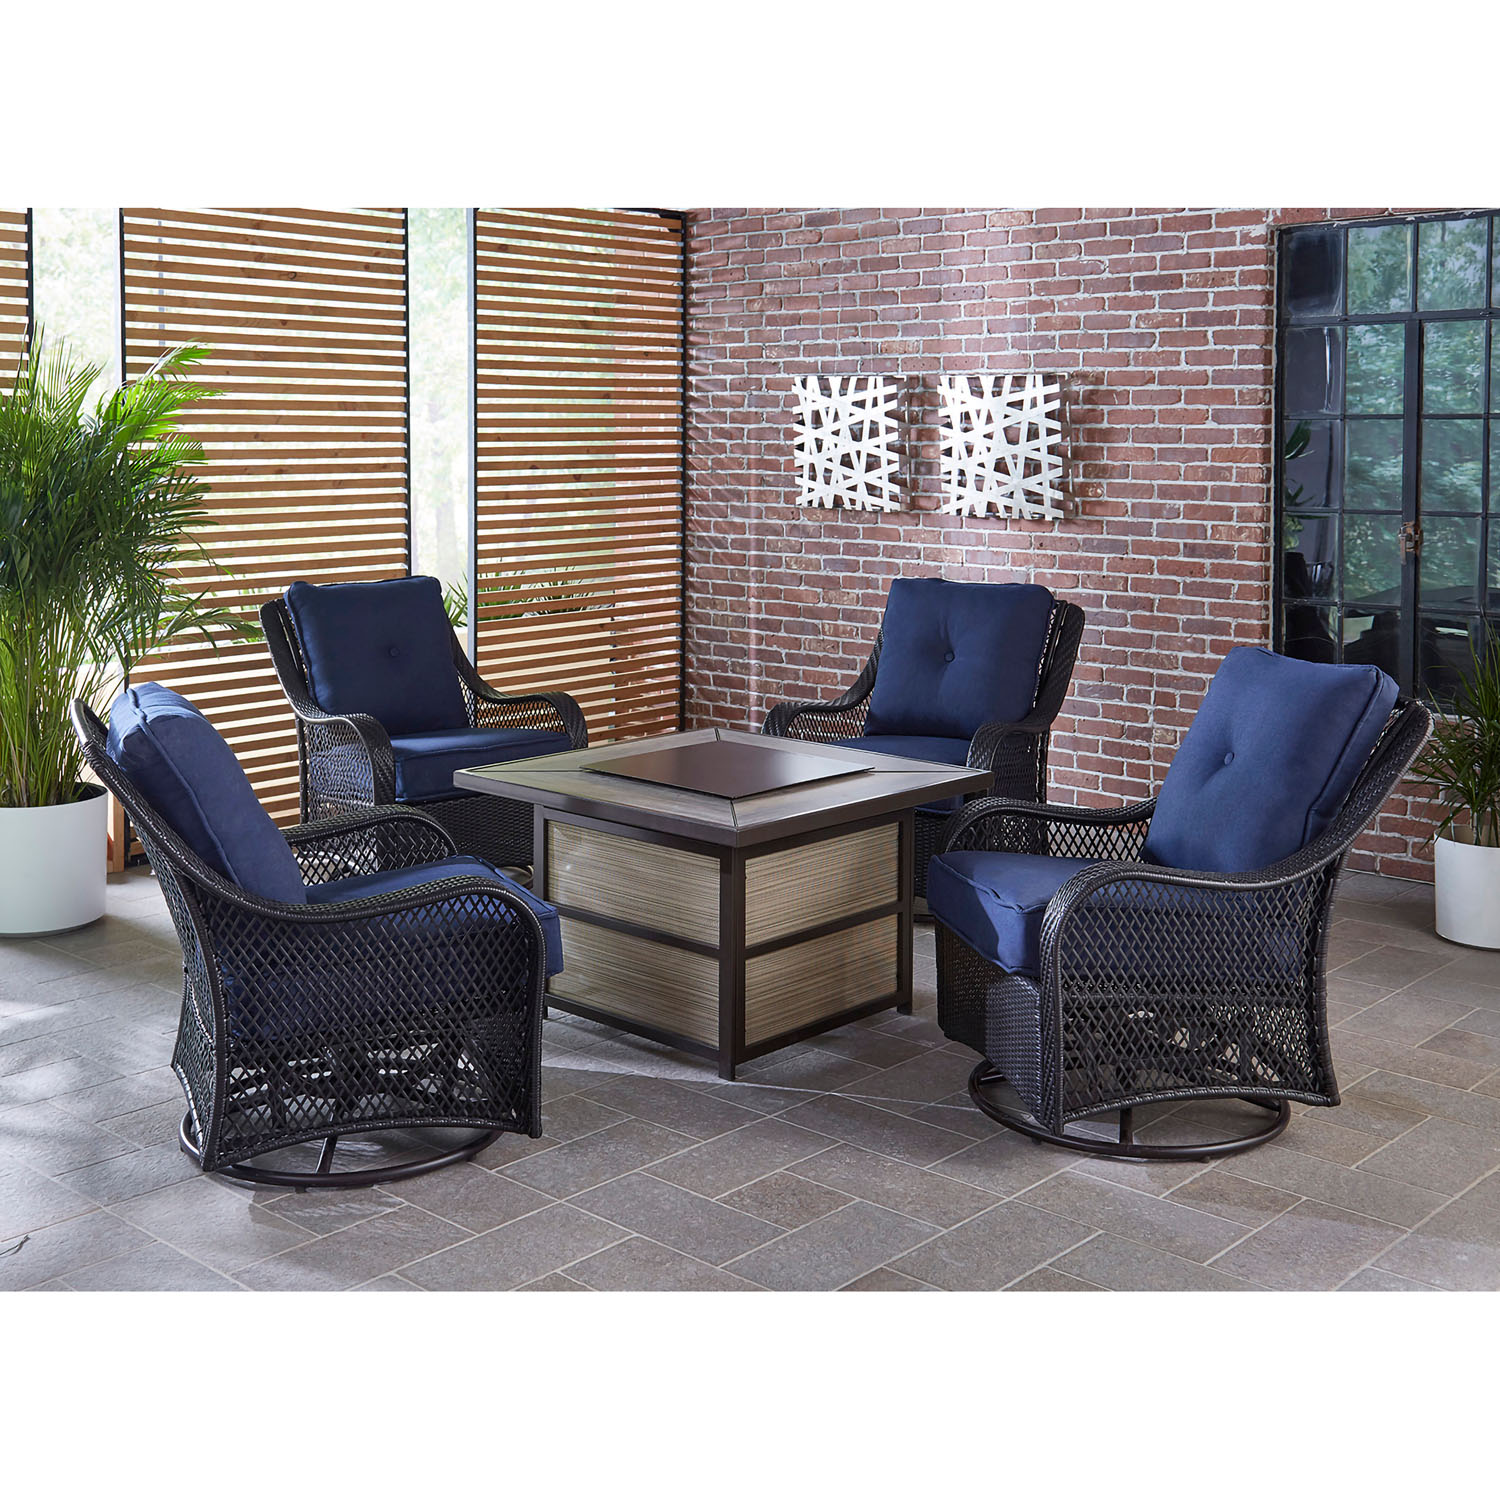 Hanover Orleans 5-Piece Fire Pit Chat Set with a 40,000 BTU Fire Pit Table and 4 Woven Swivel Gliders in Navy Blue - image 2 of 11